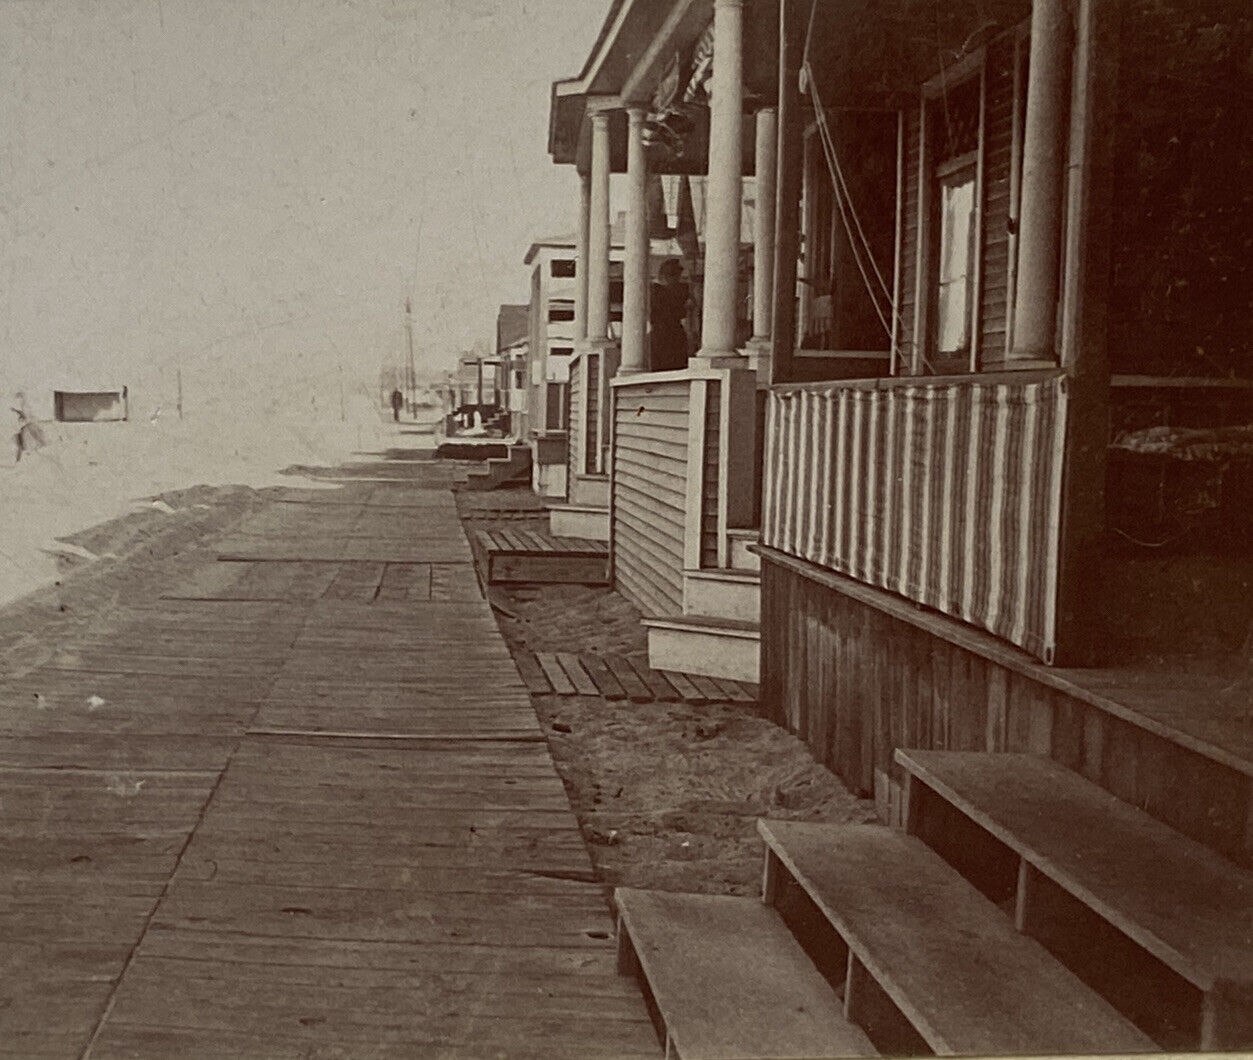 Antique Sepia Houses Card Mounted Photograph Wooden Sidewalk 5 X 3.5” Porches